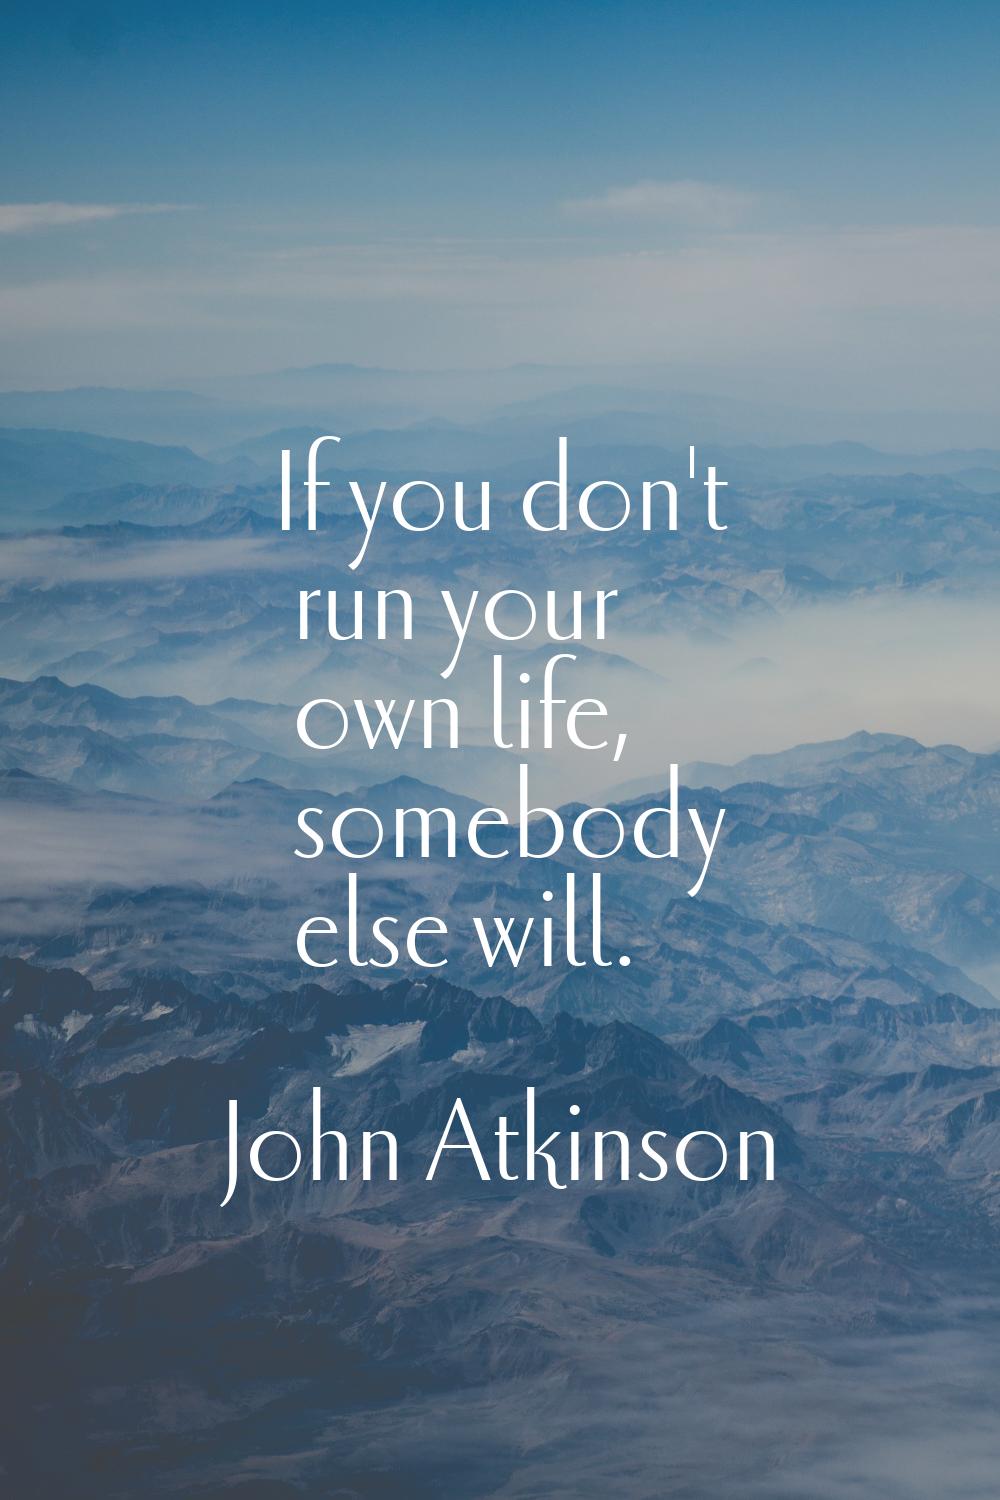 If you don't run your own life, somebody else will.